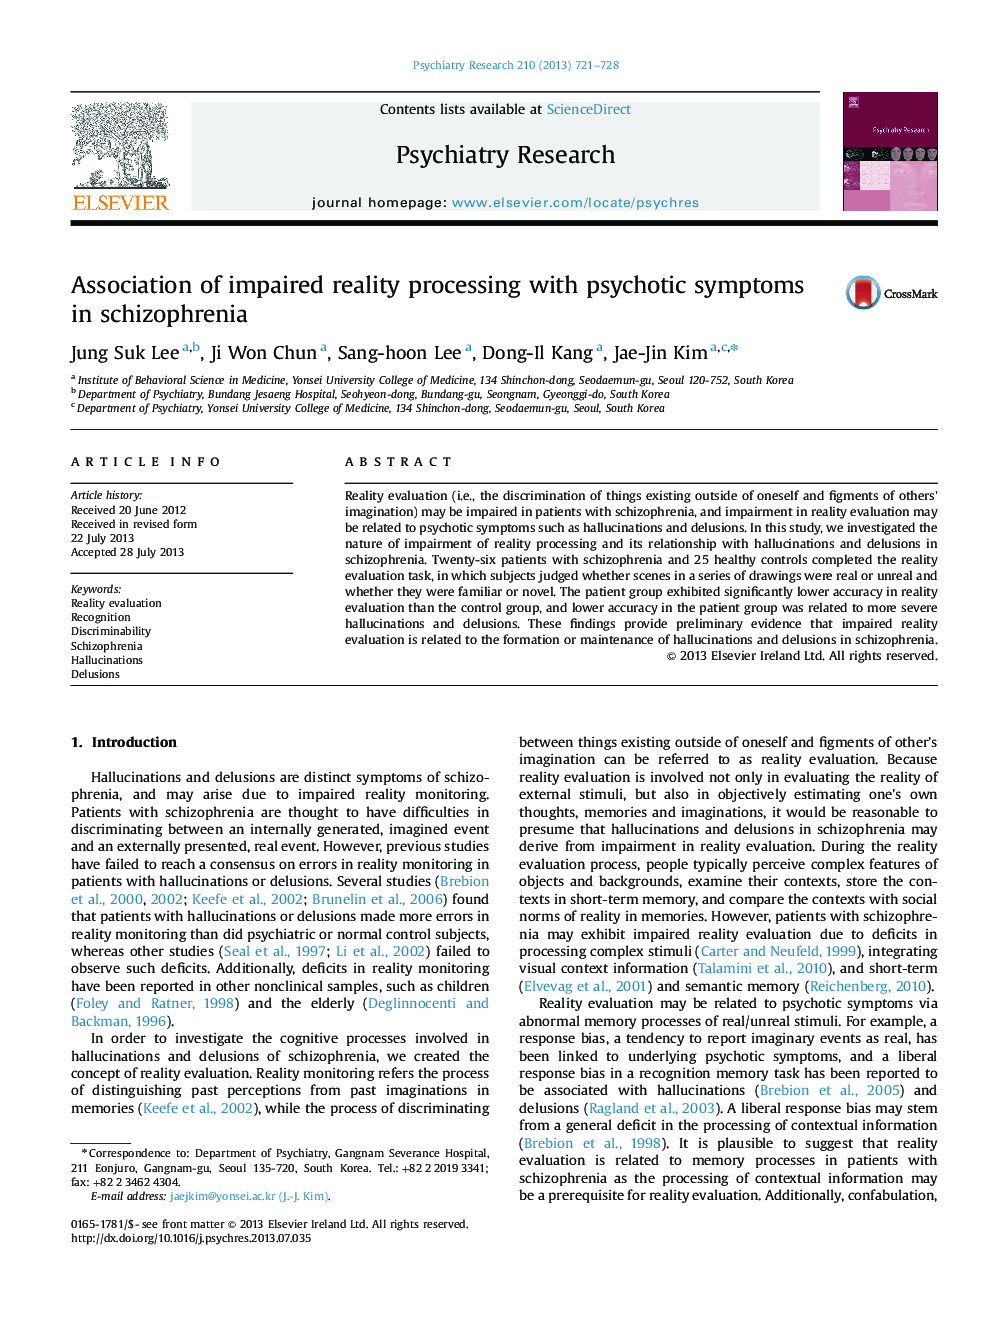 Association of impaired reality processing with psychotic symptoms in schizophrenia